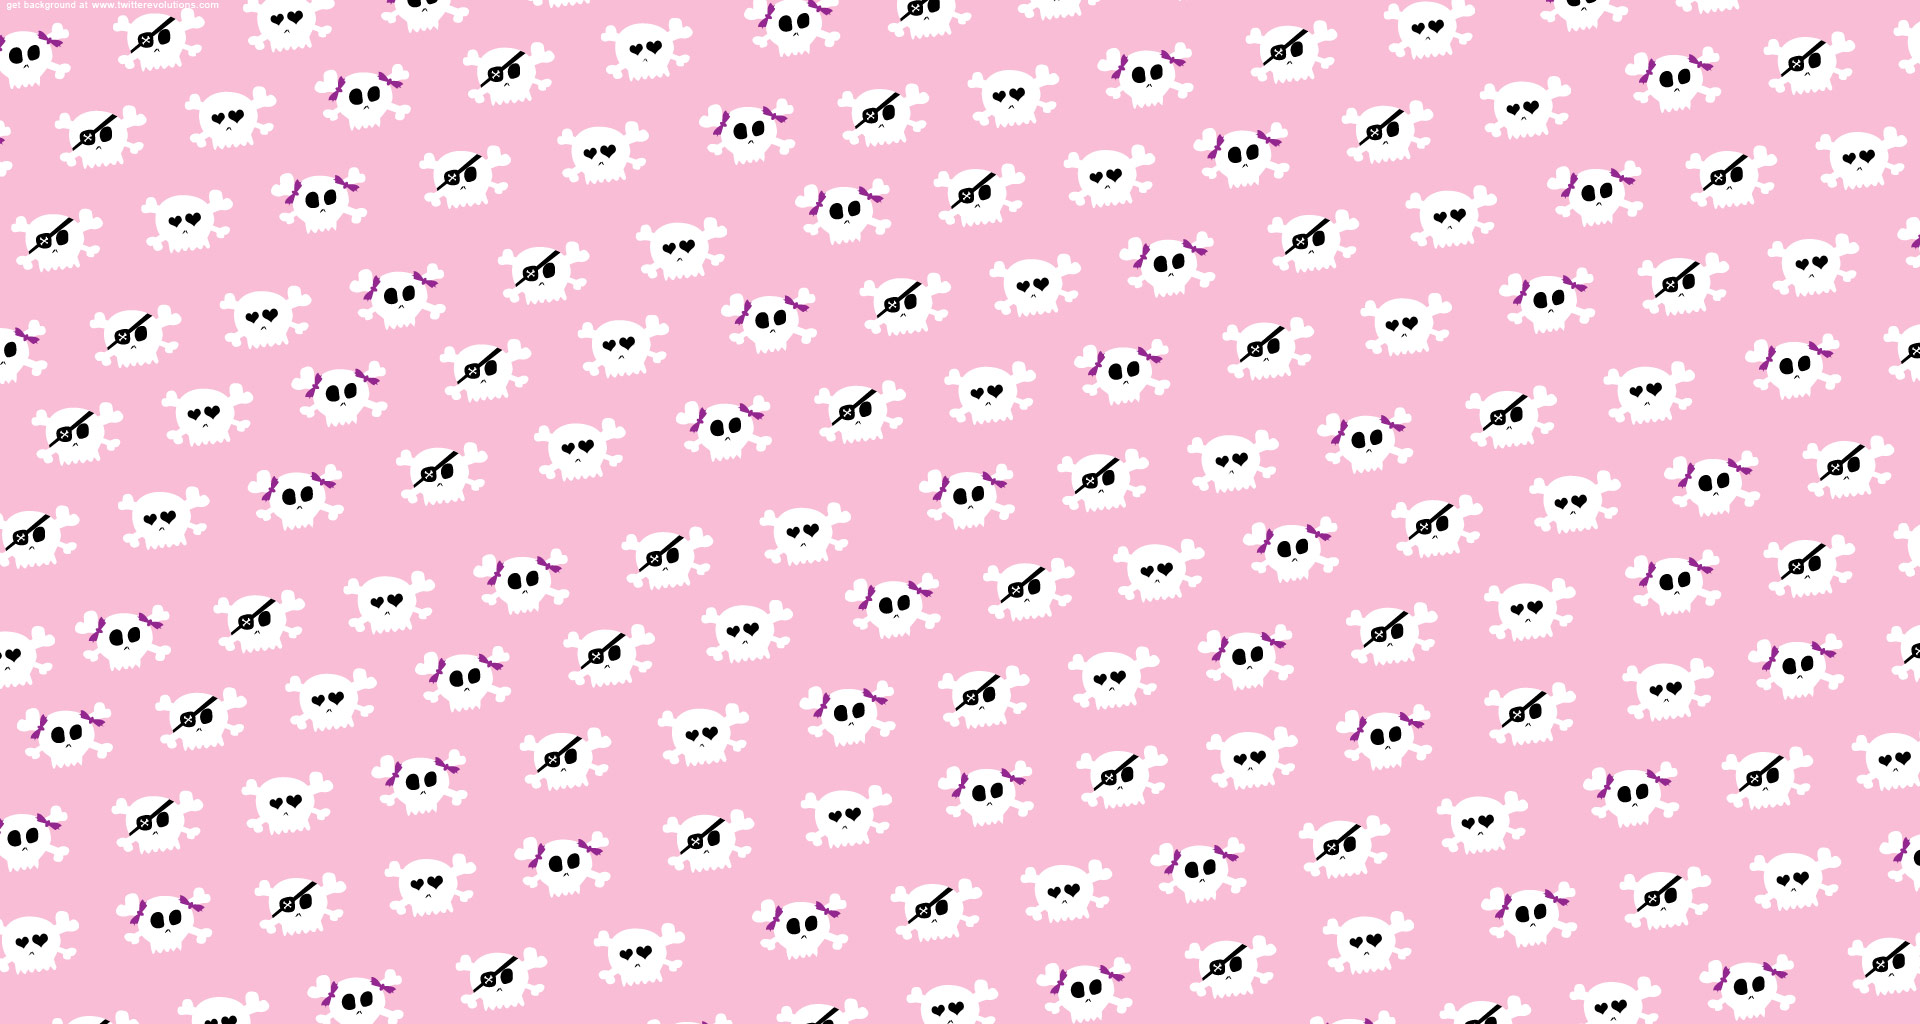 Cute Skull And Crossbones Wallpaper By HD Daily